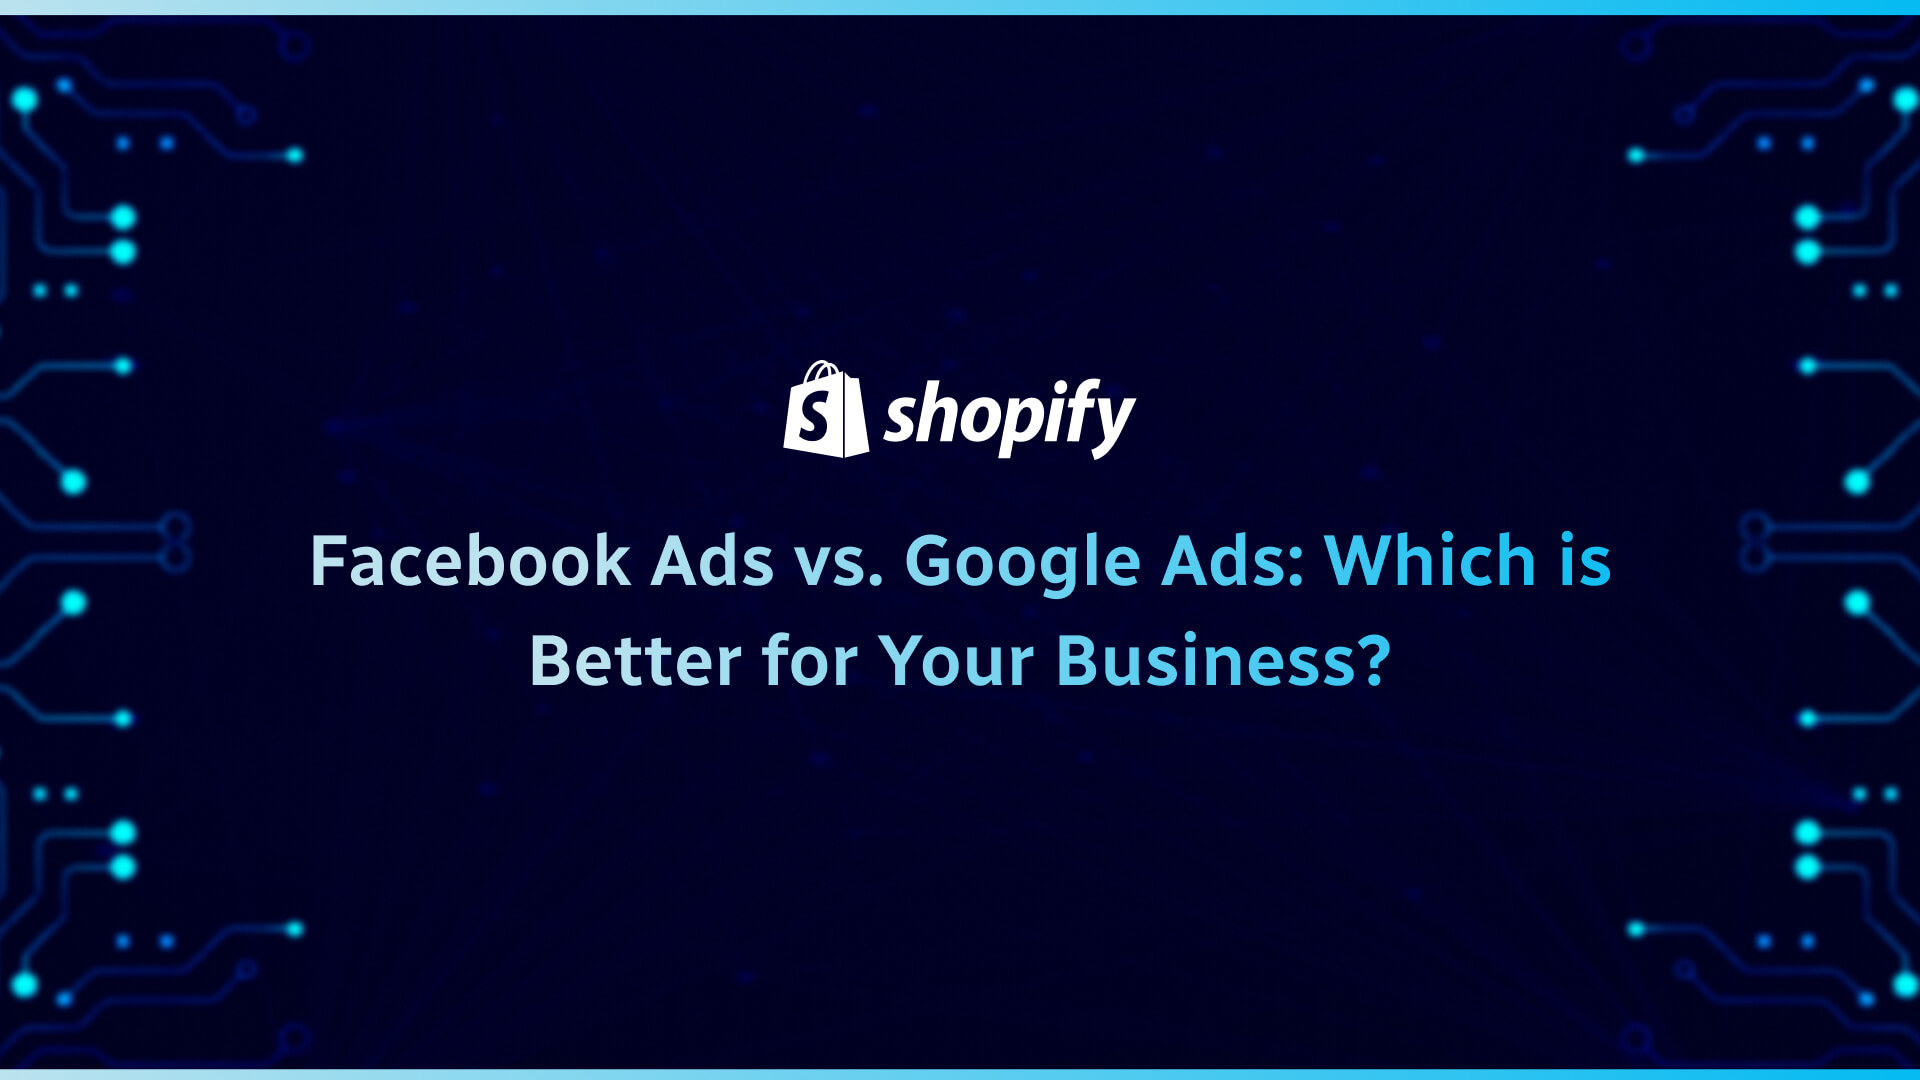 Facebook Ads vs. Google Ads: Which is Better for Your Business?